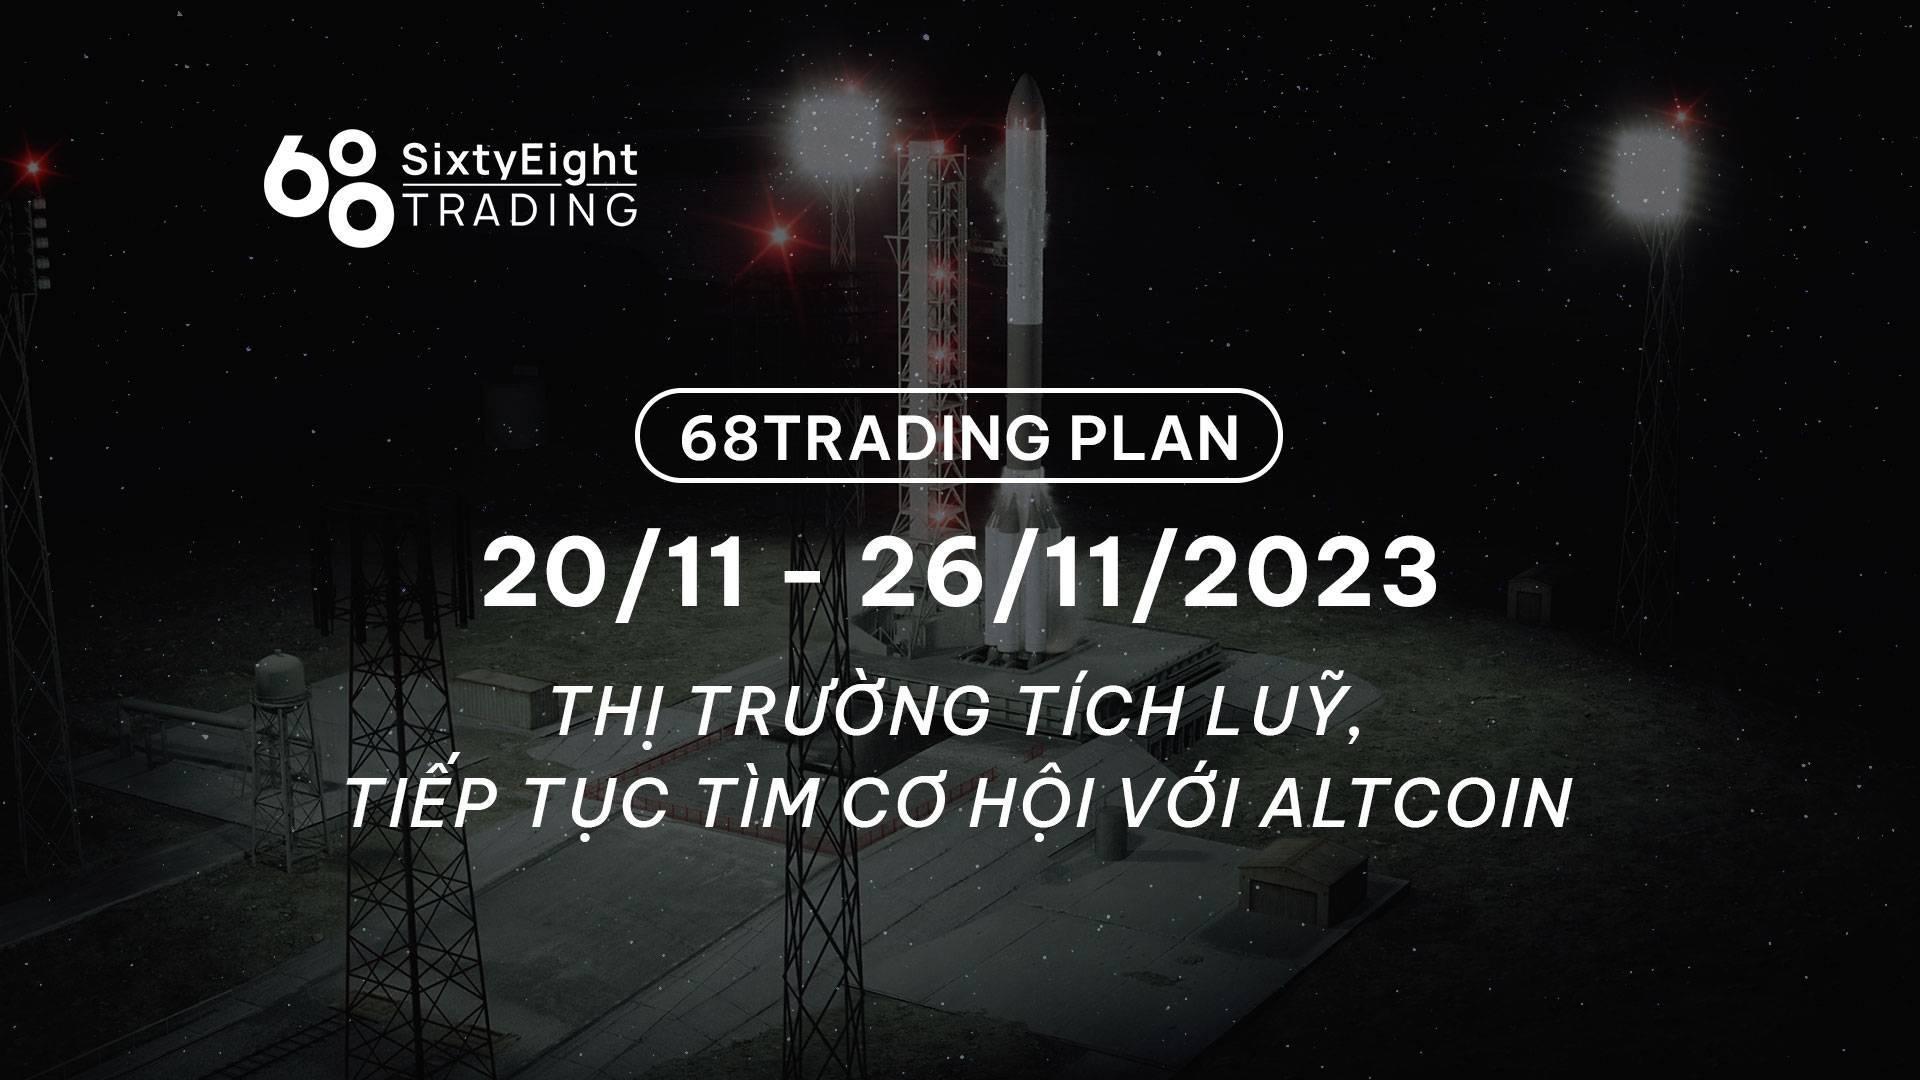 68-trading-plan-2011-26112023-thi-truong-tich-luy-tiep-tuc-tim-co-hoi-voi-altcoin